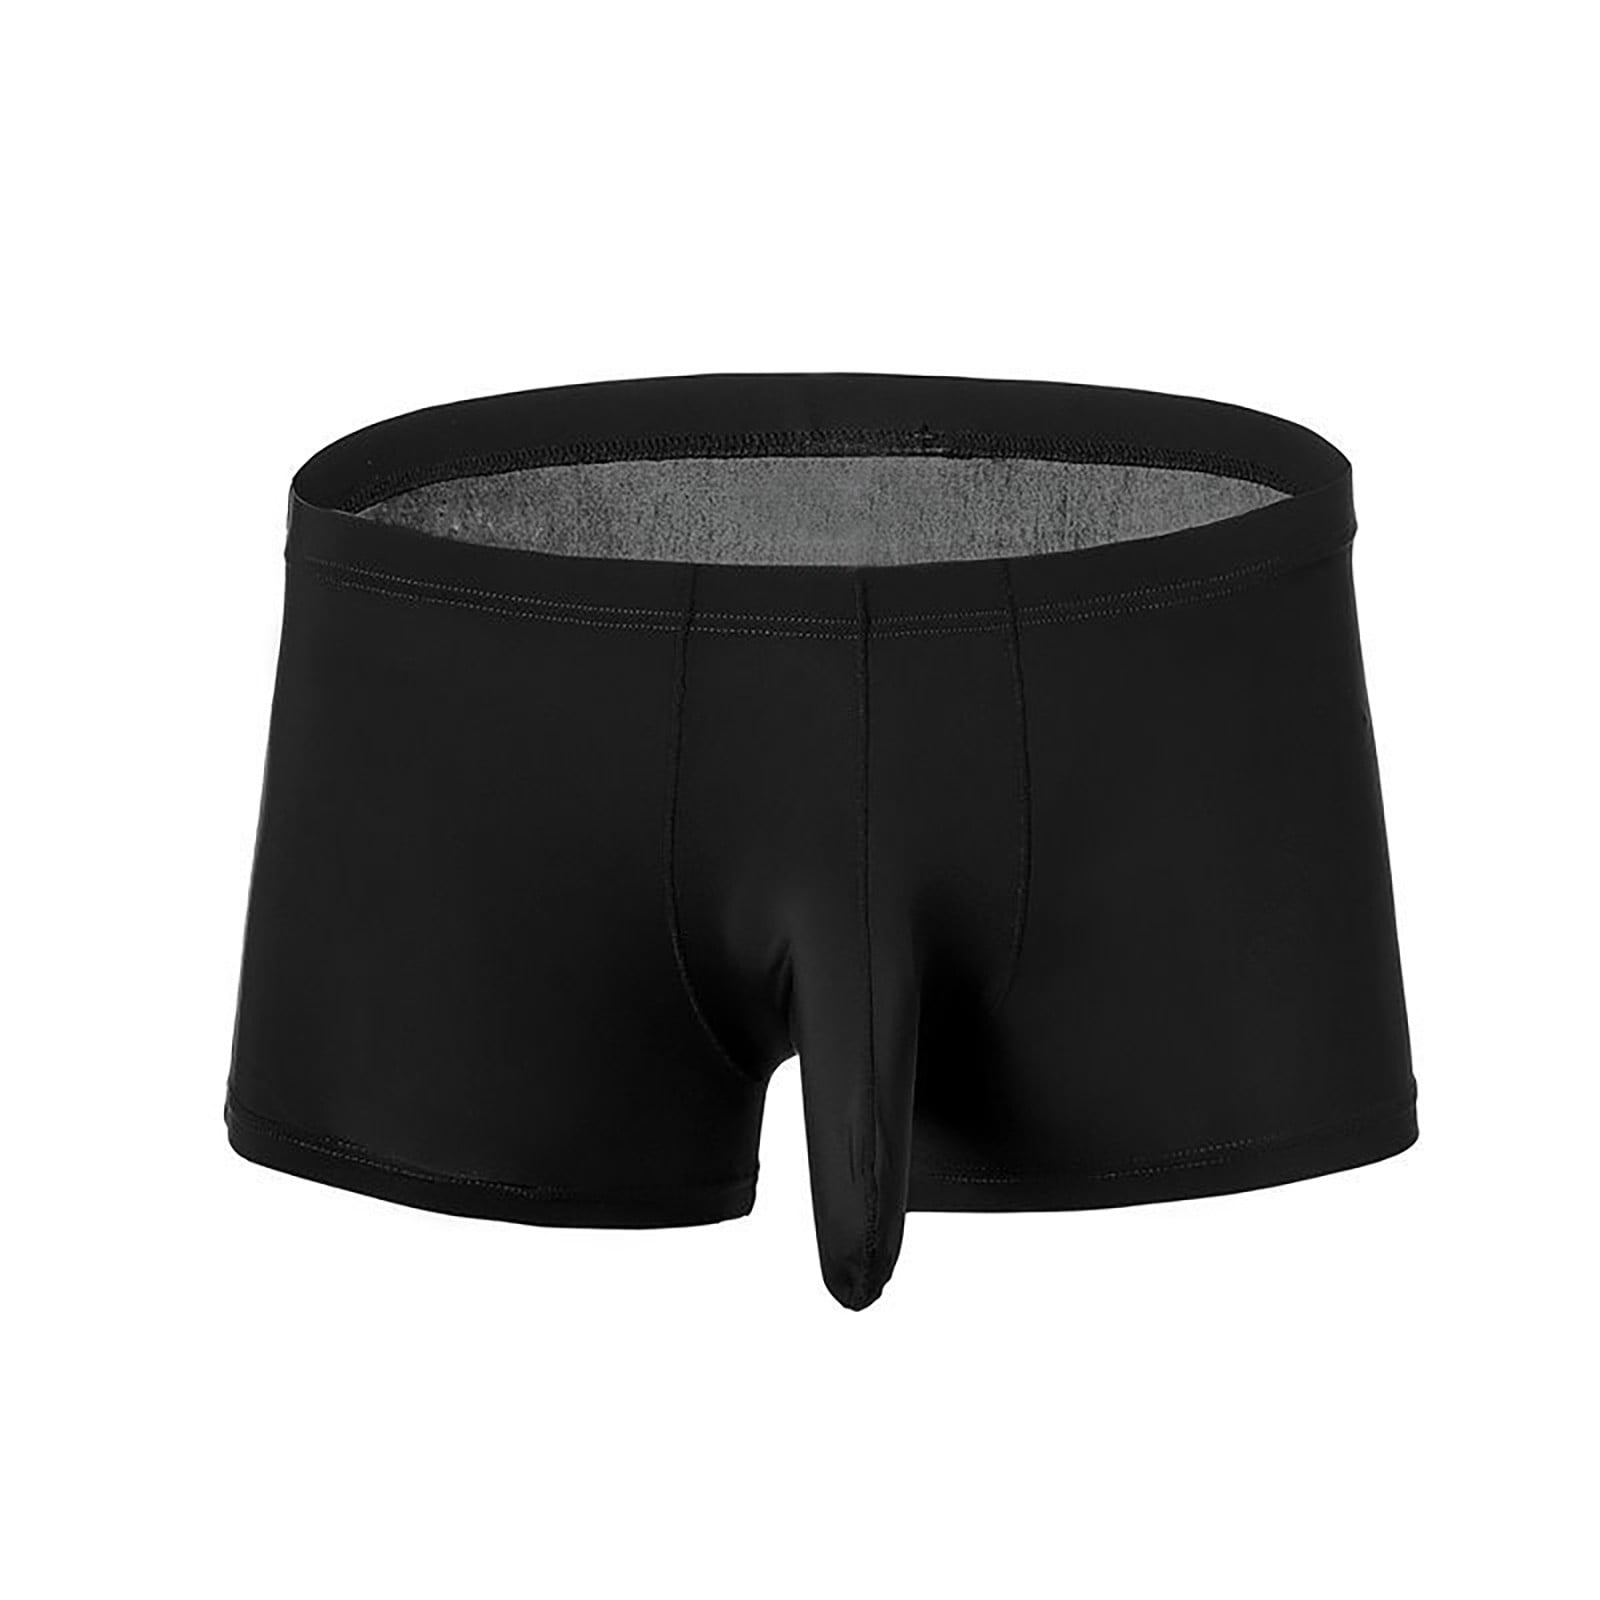 CHGBMOK Mens Boxer Briefs Solid Fashion Personalized Mid-Waist Hoop Panties  Buttock Covering Briefs Underwear 